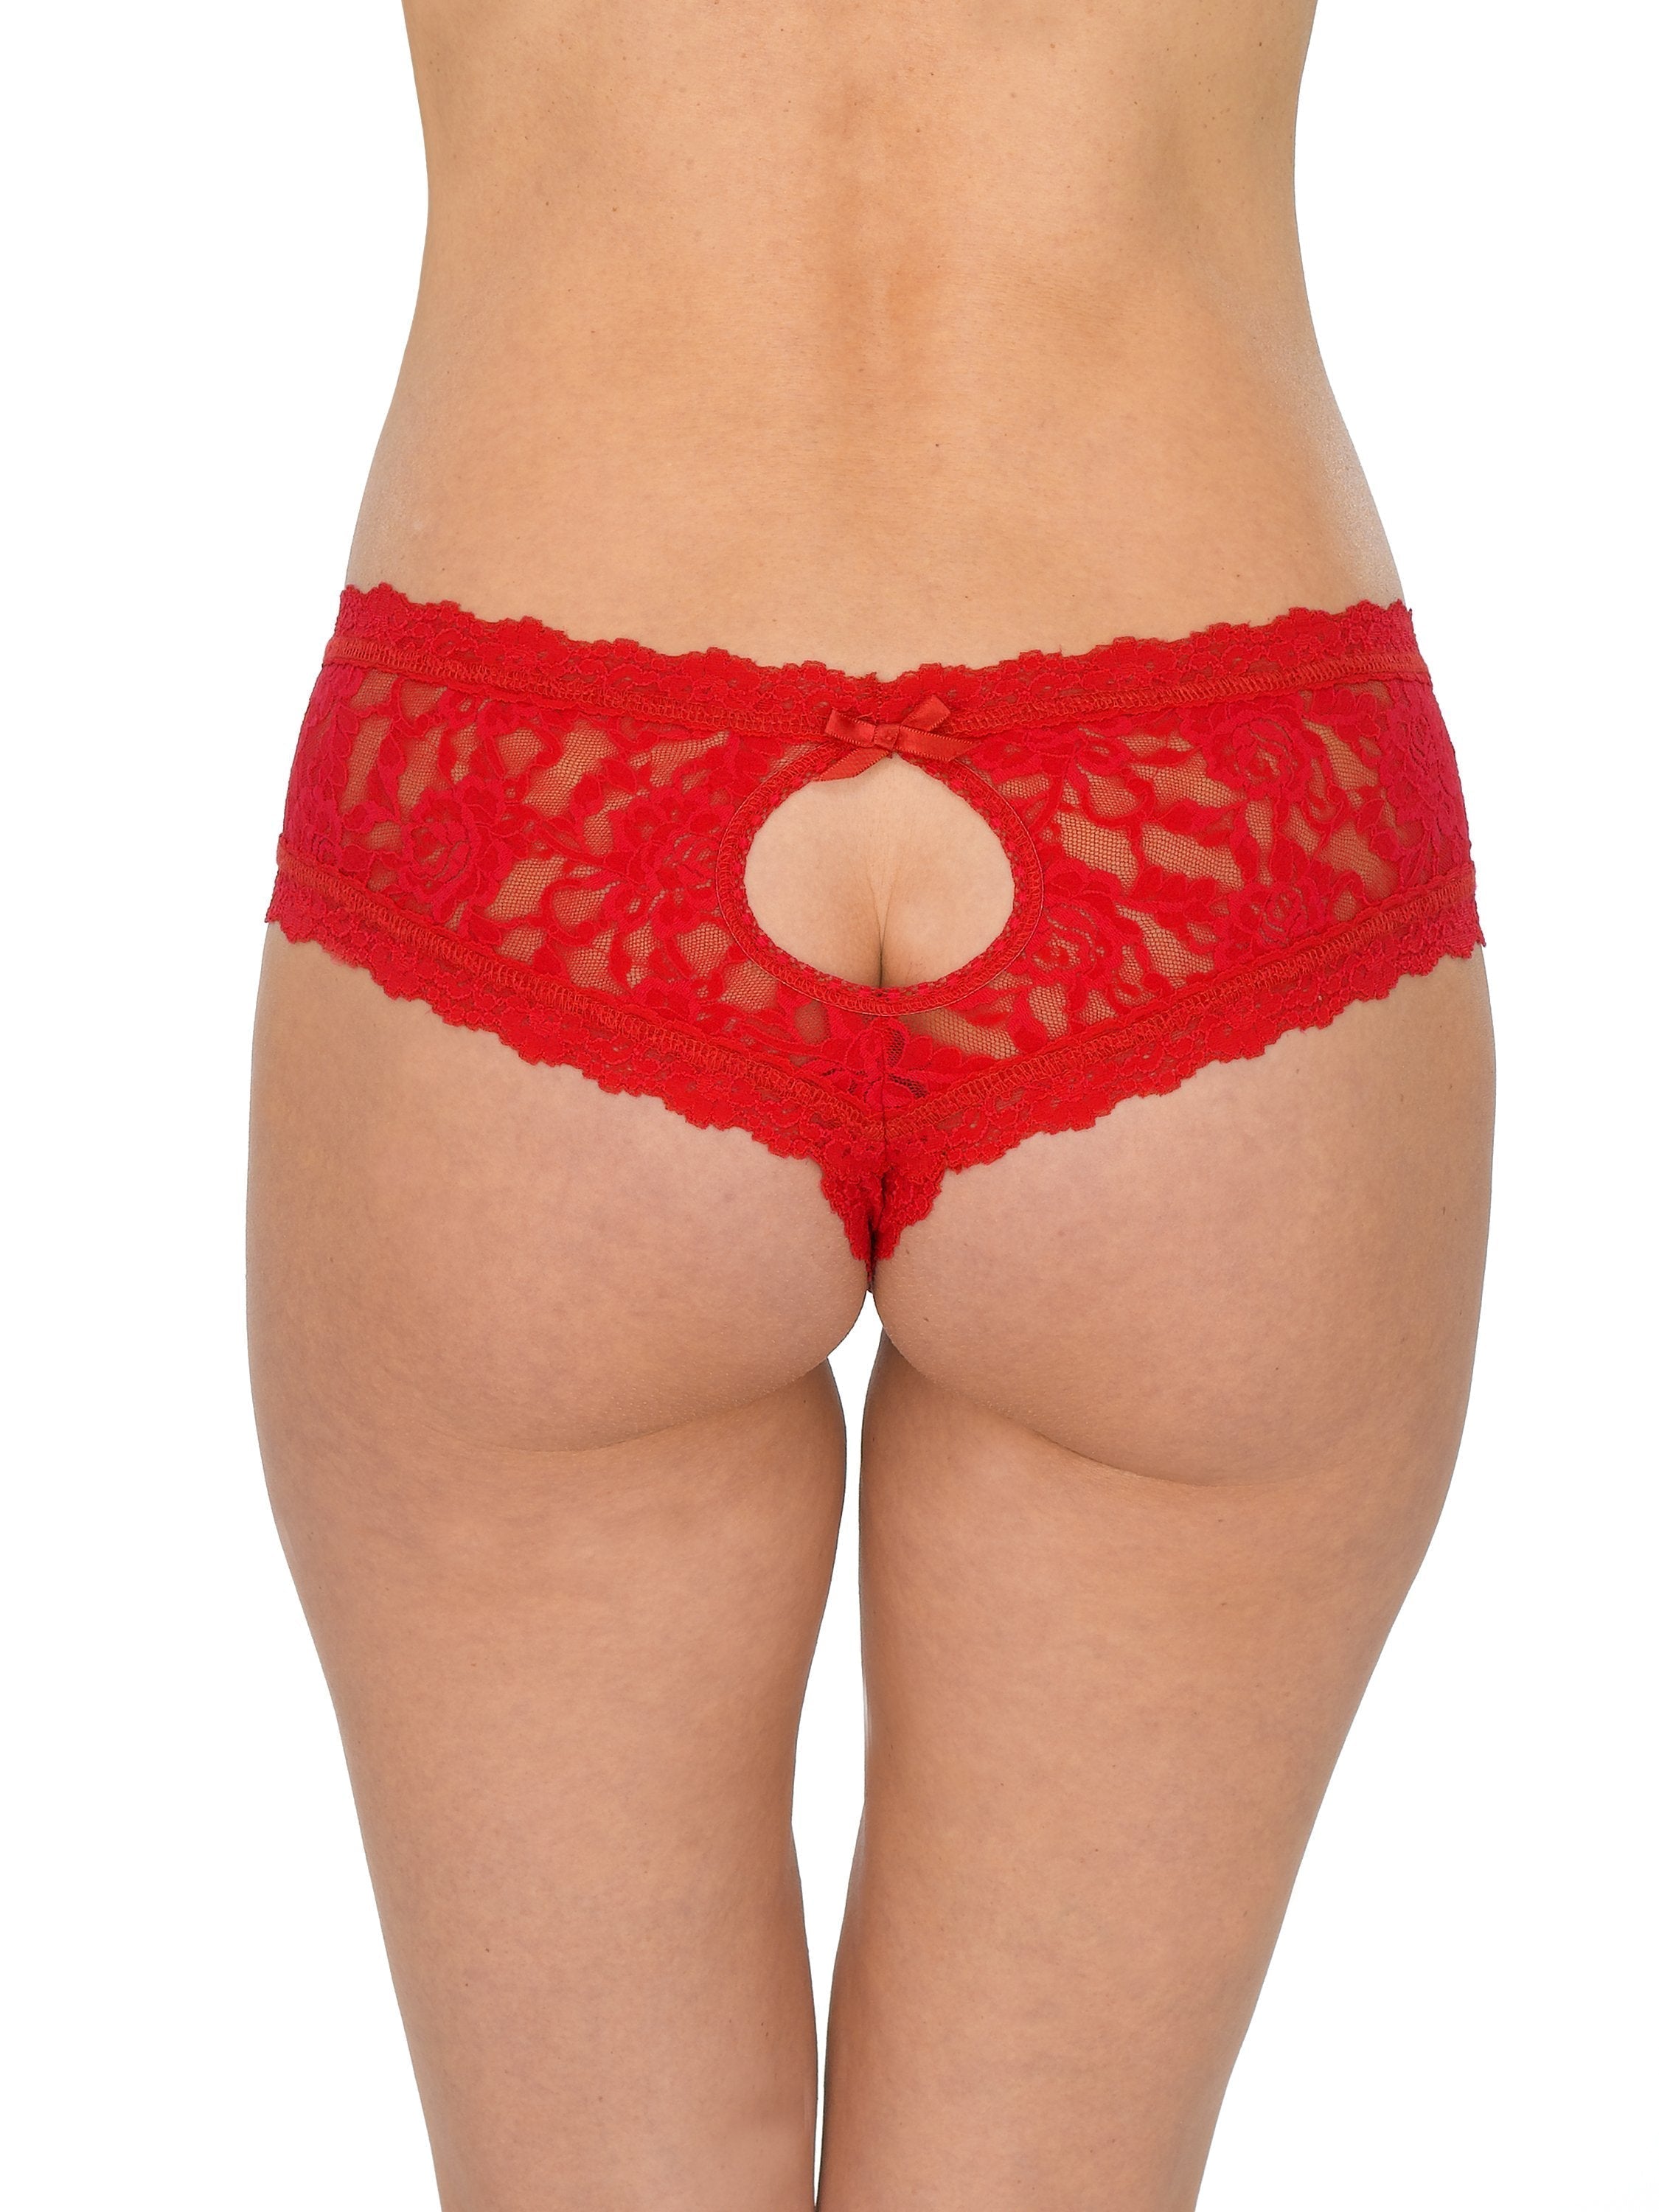 Hipster Brazilian Pink Lace Crotch-less Briefs